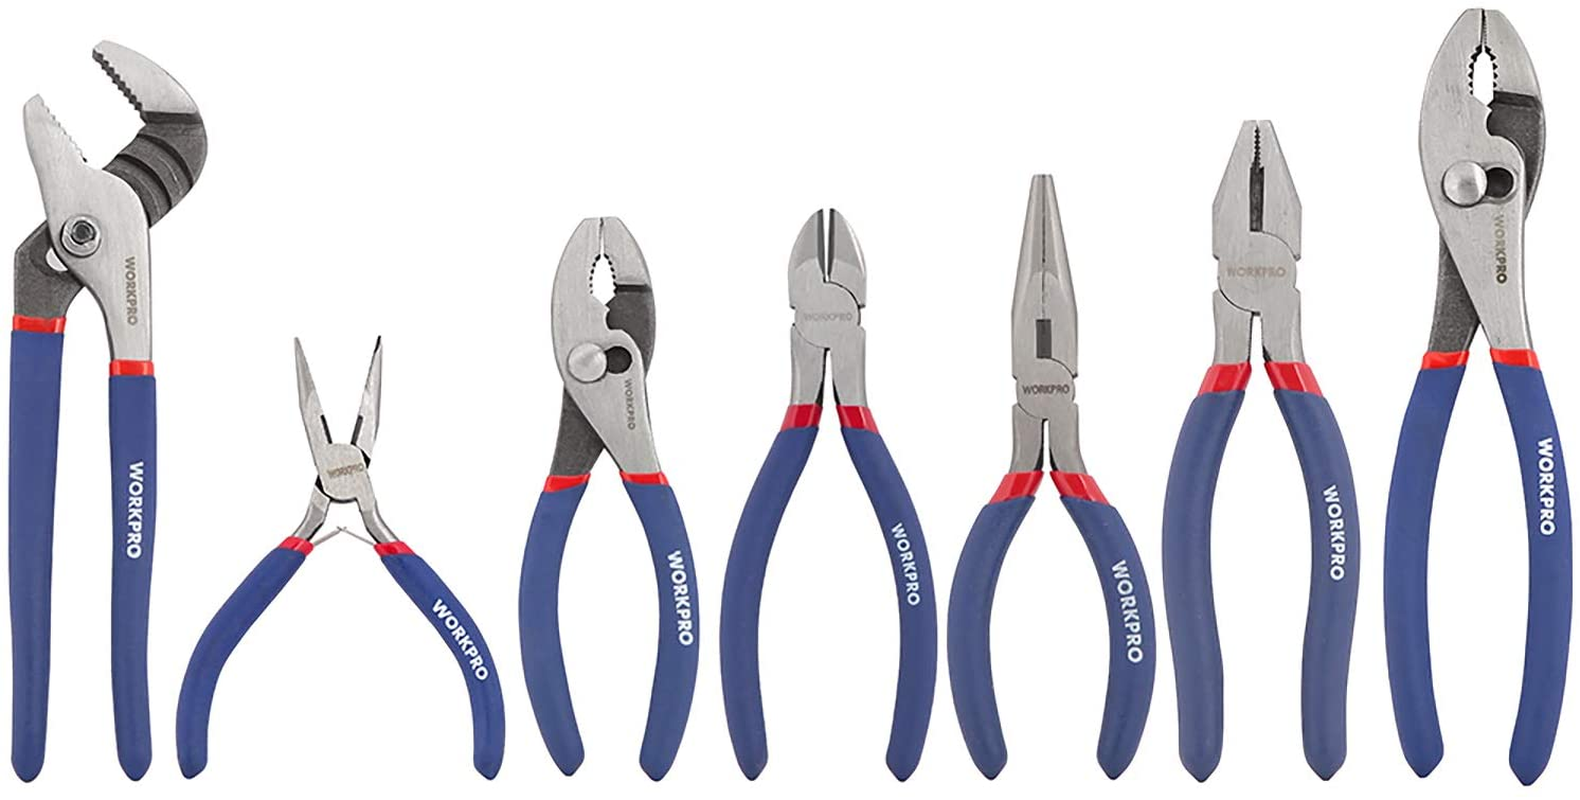 7-Piece Pliers Set (8-Inch Groove Joint Pliers, 6-Inch Long Nose, 6-Inch Slip Joint, 4-1/2 Inch Long Nose, 6-Inch Diagonal, 7-Inch Linesman, 8-Inch Slip Joint) for DIY & Home Use